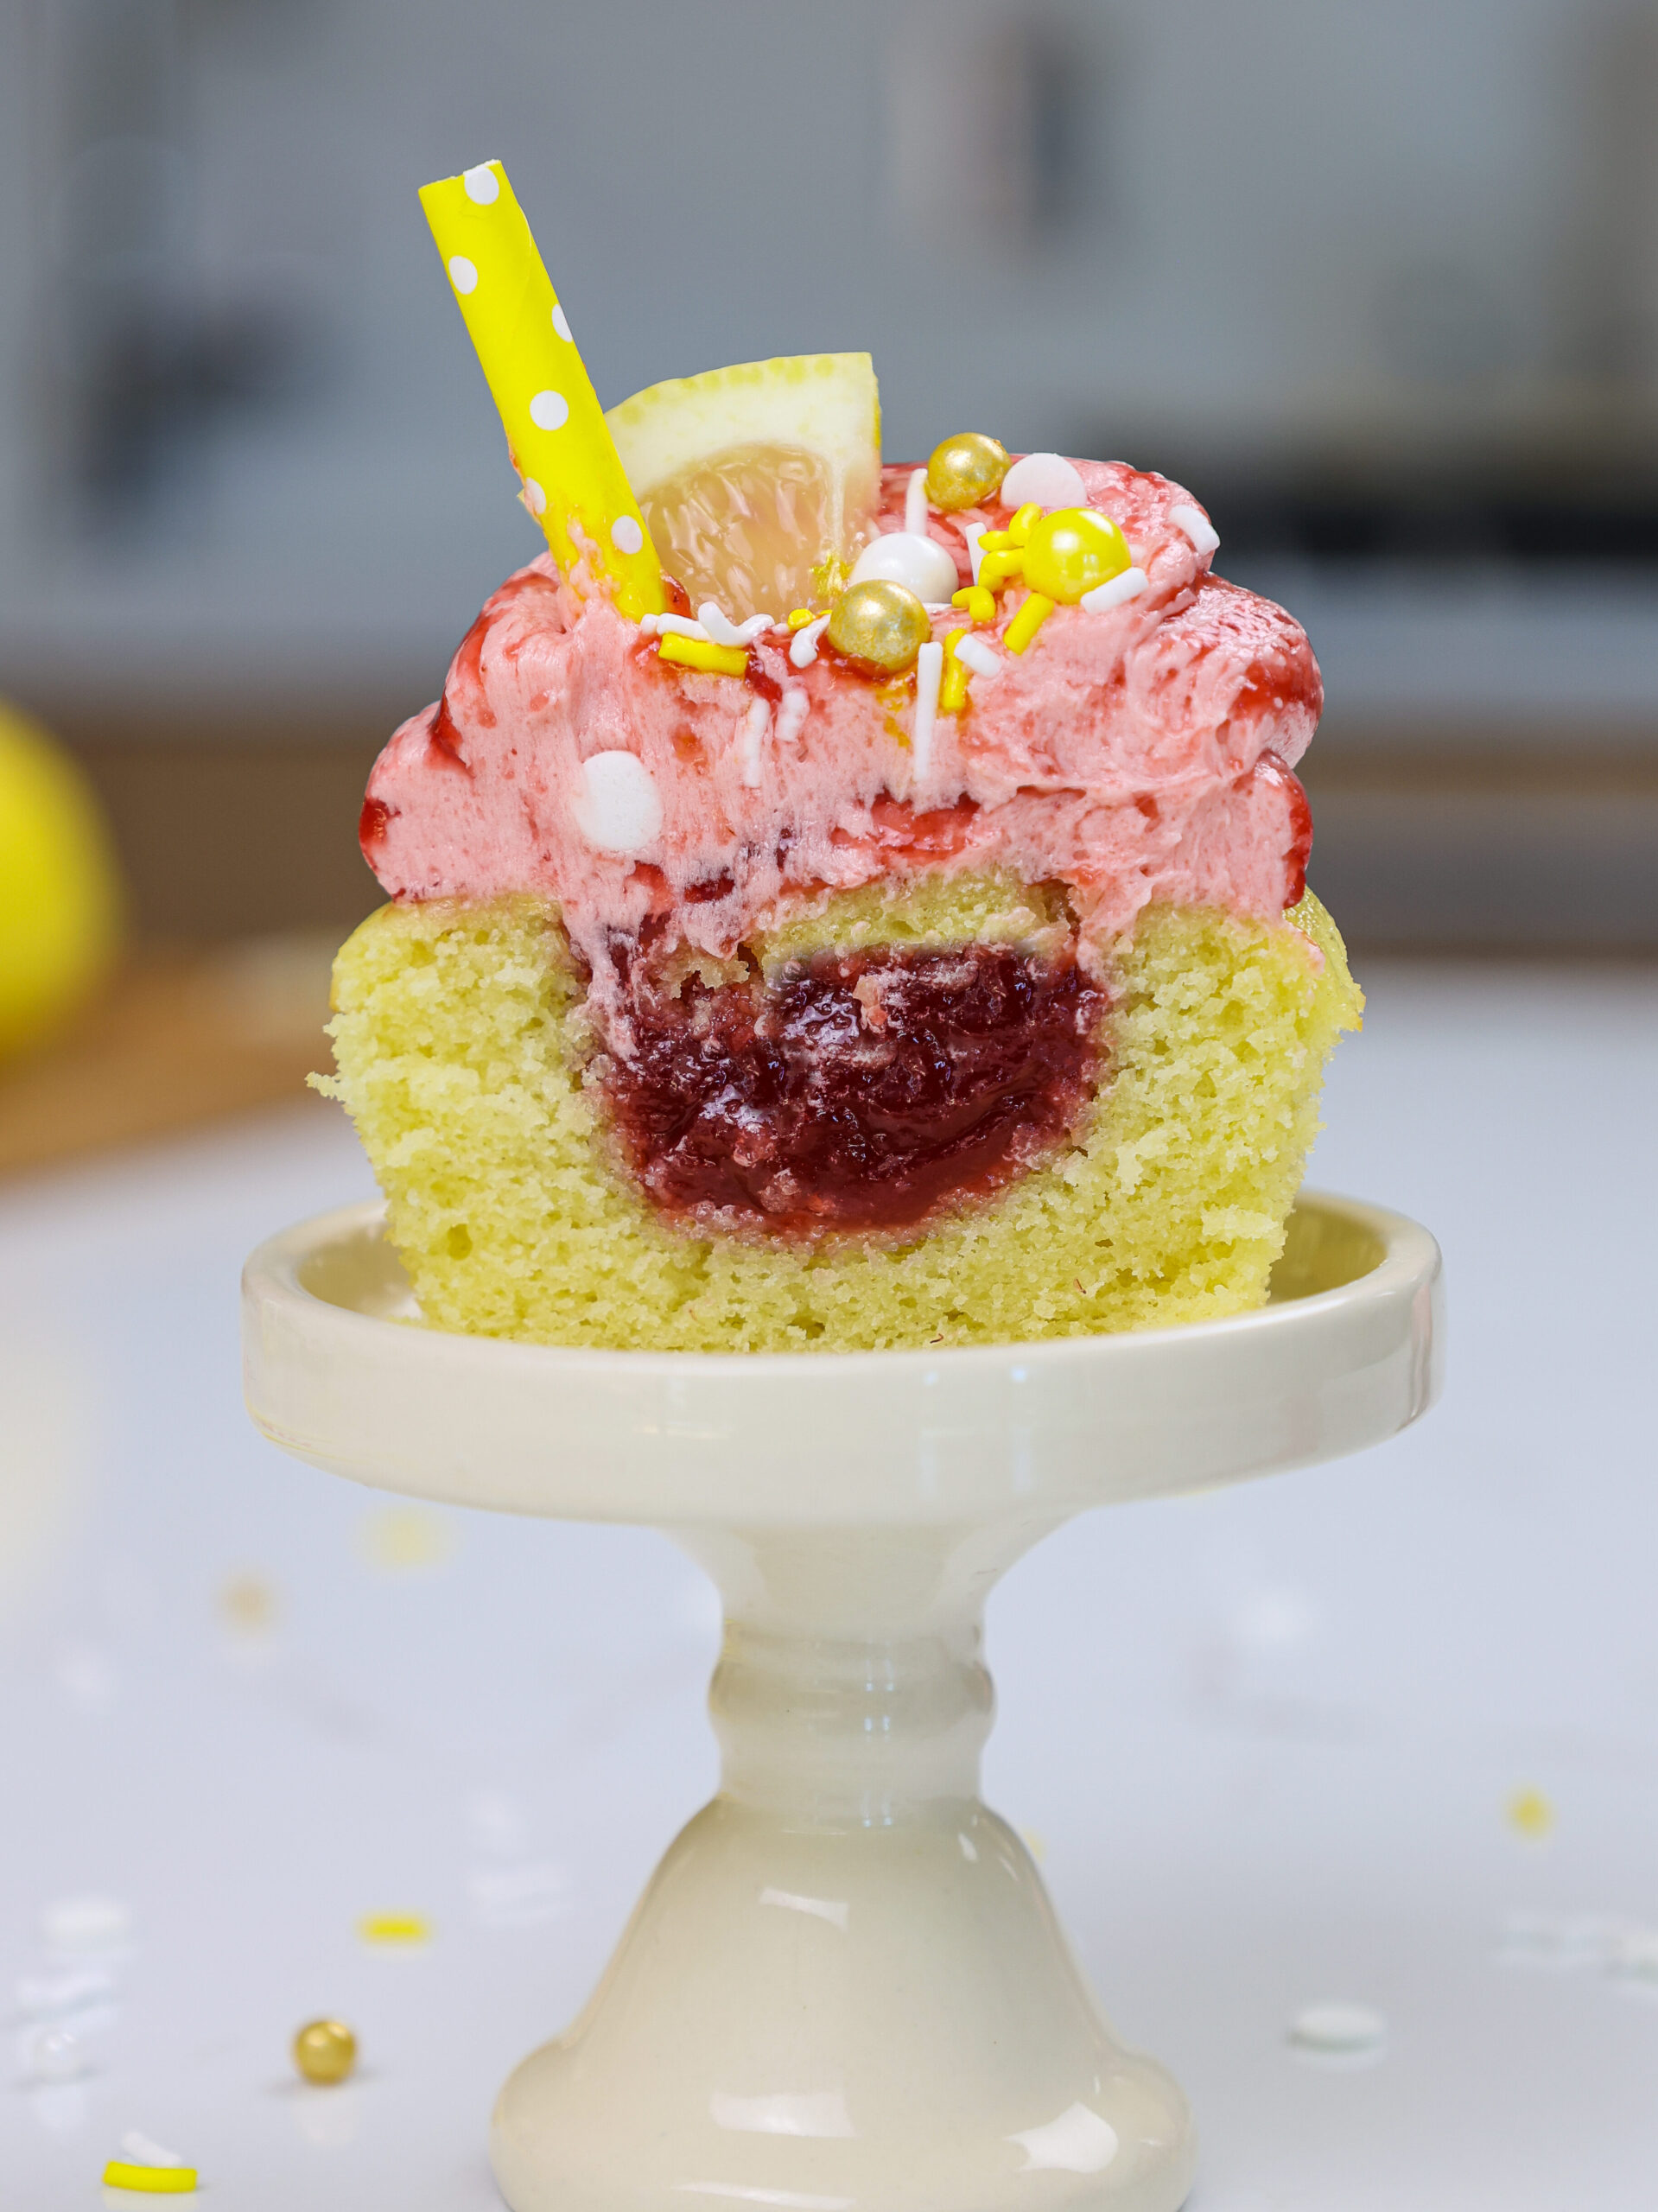 image of a raspberry lemonade cupcake that's been cut in half to show the raspberry filling inside